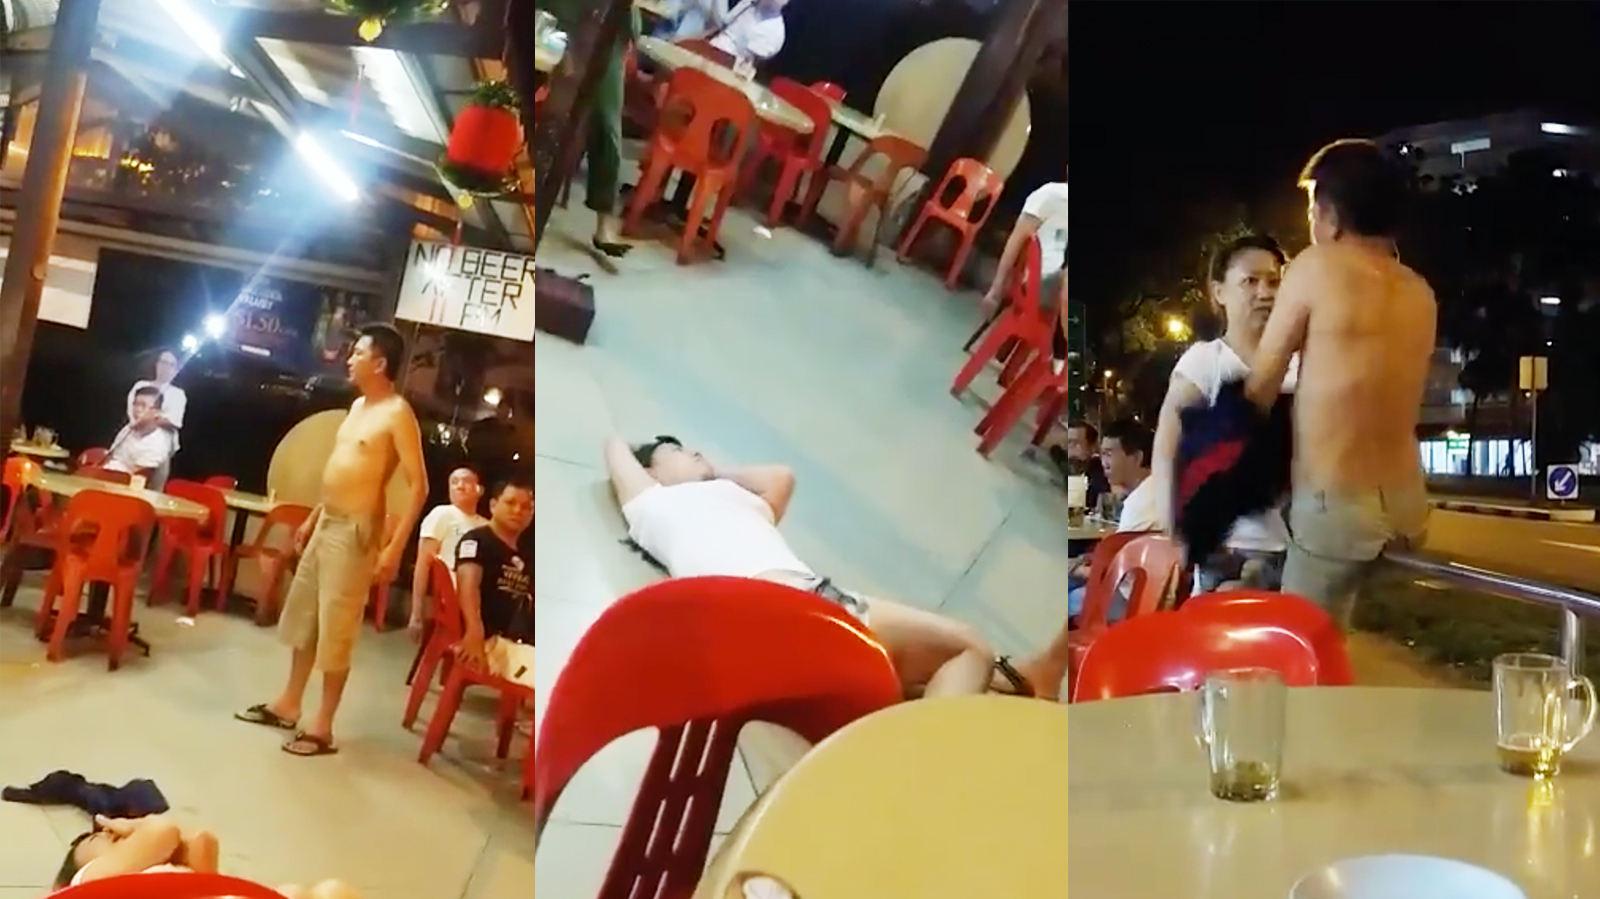 What a waste of time, that Hougang kopitiam fight